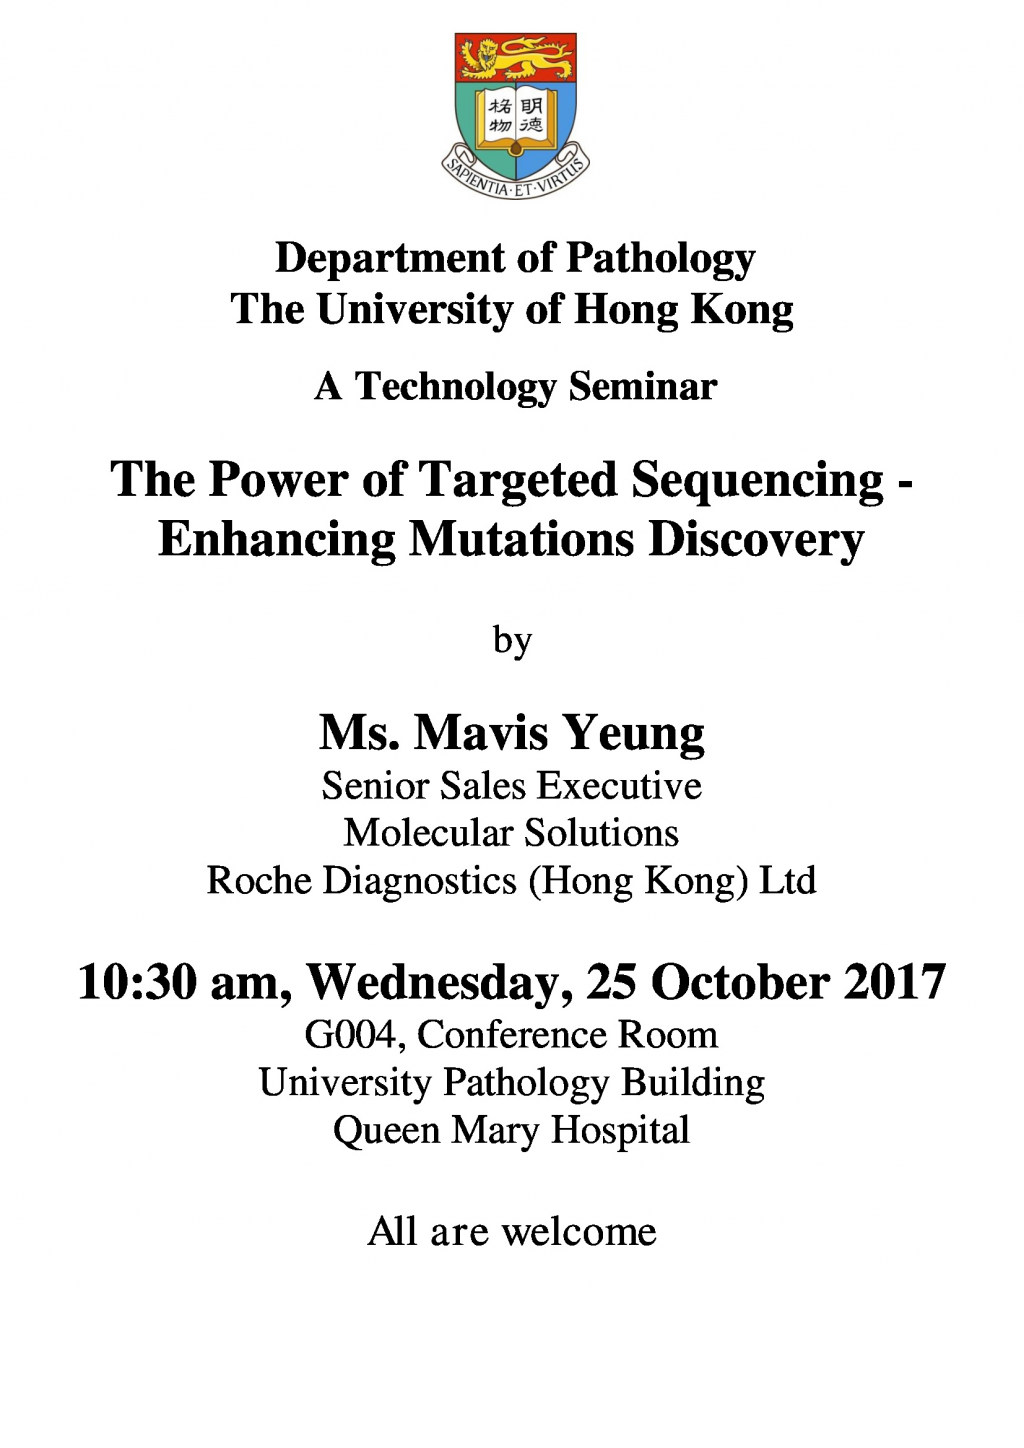 A Technology Seminar on The Power of Targeted Sequencing - Enhancing Mutations Discovery on 25 Oct 2017 (10:30am)